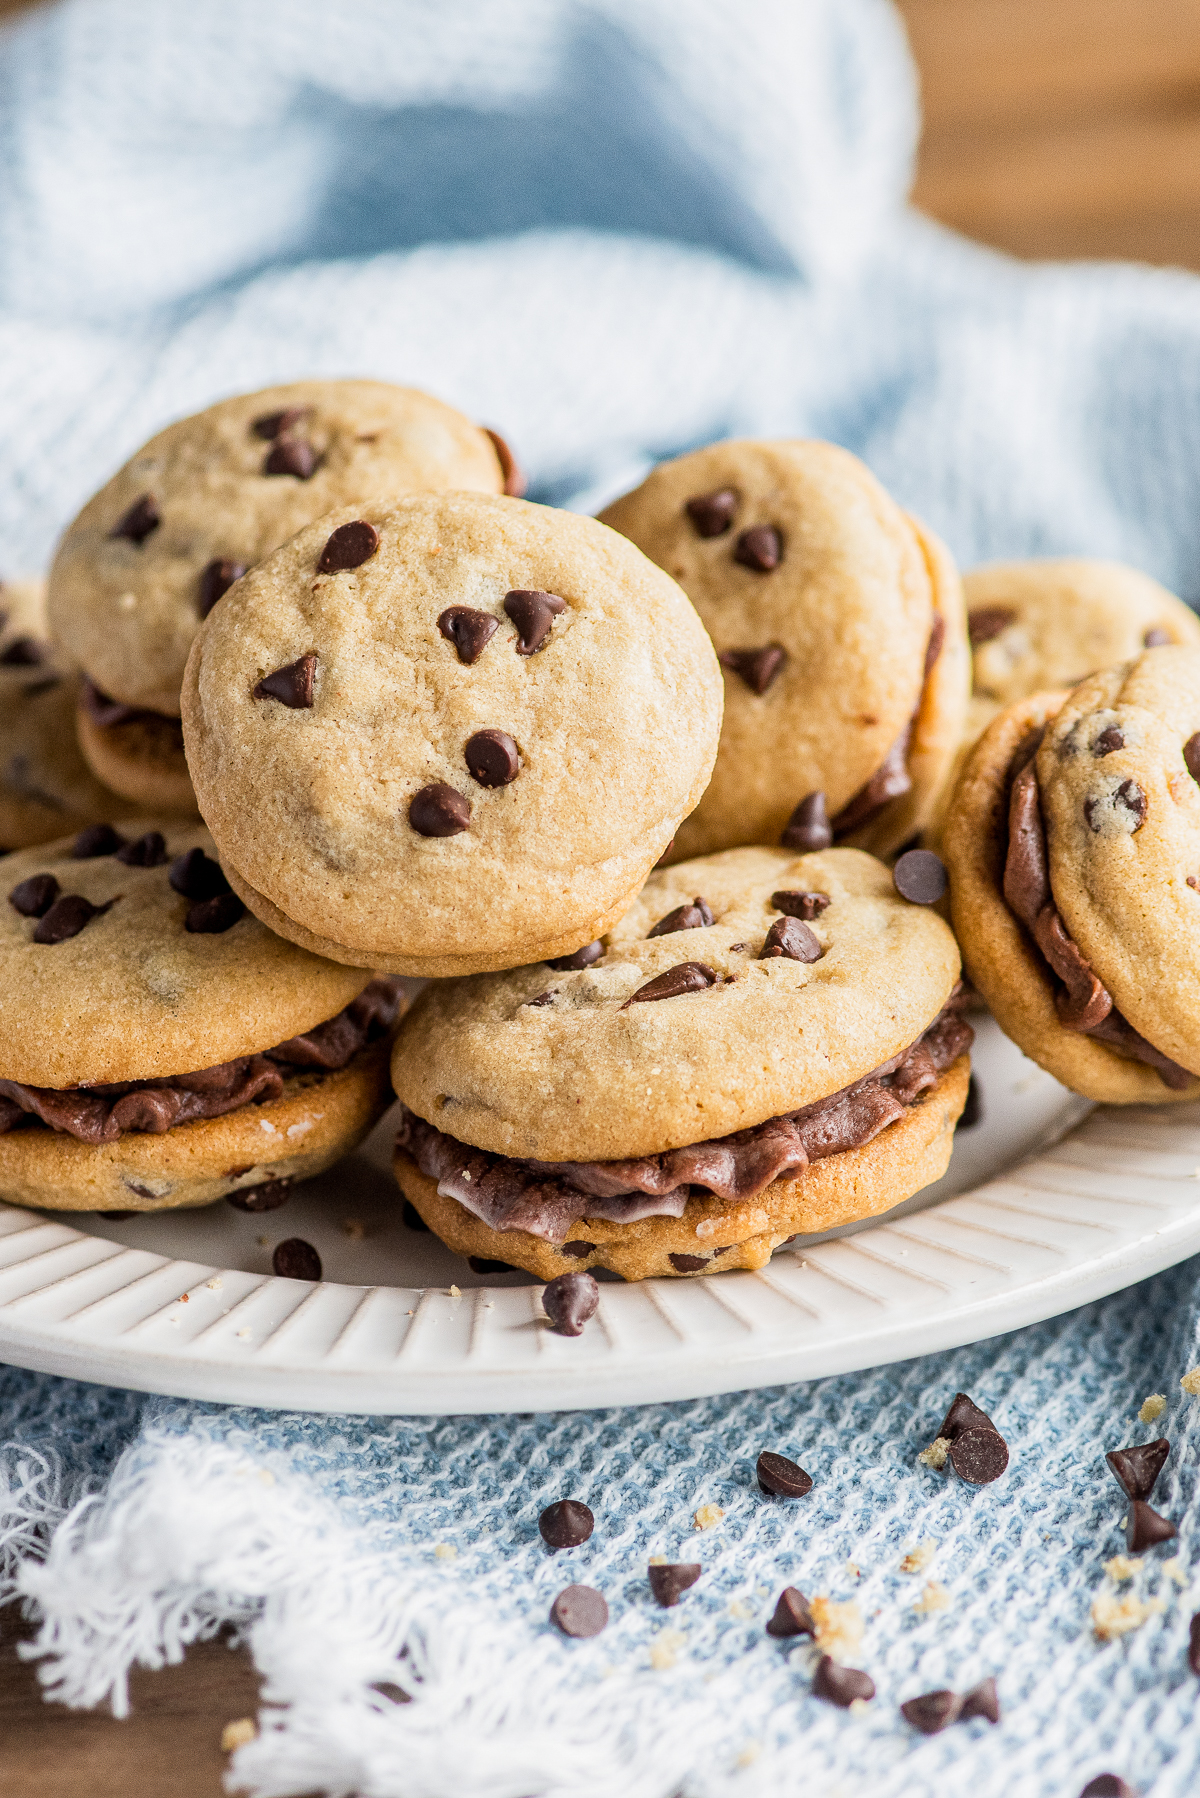 Stacked Chocolate Chip Sandwich Cookies on plate.